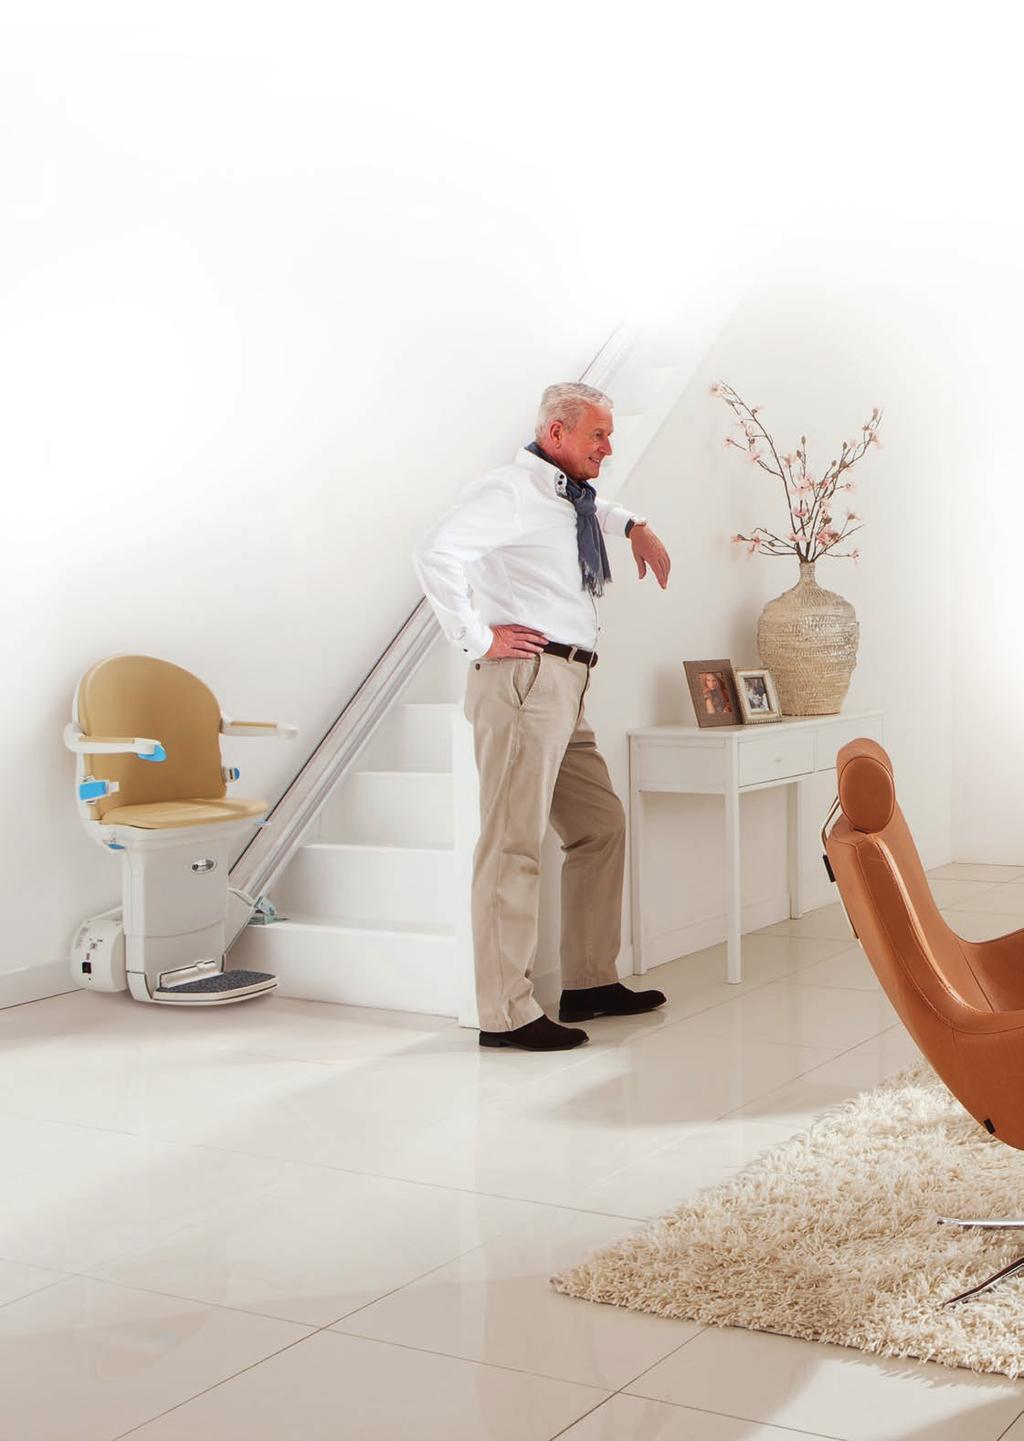 The benefits of a straight stairlift from Handicare If you are thinking about installing a stairlift, Handicare stairlifts offer you a safe and reliable solution.